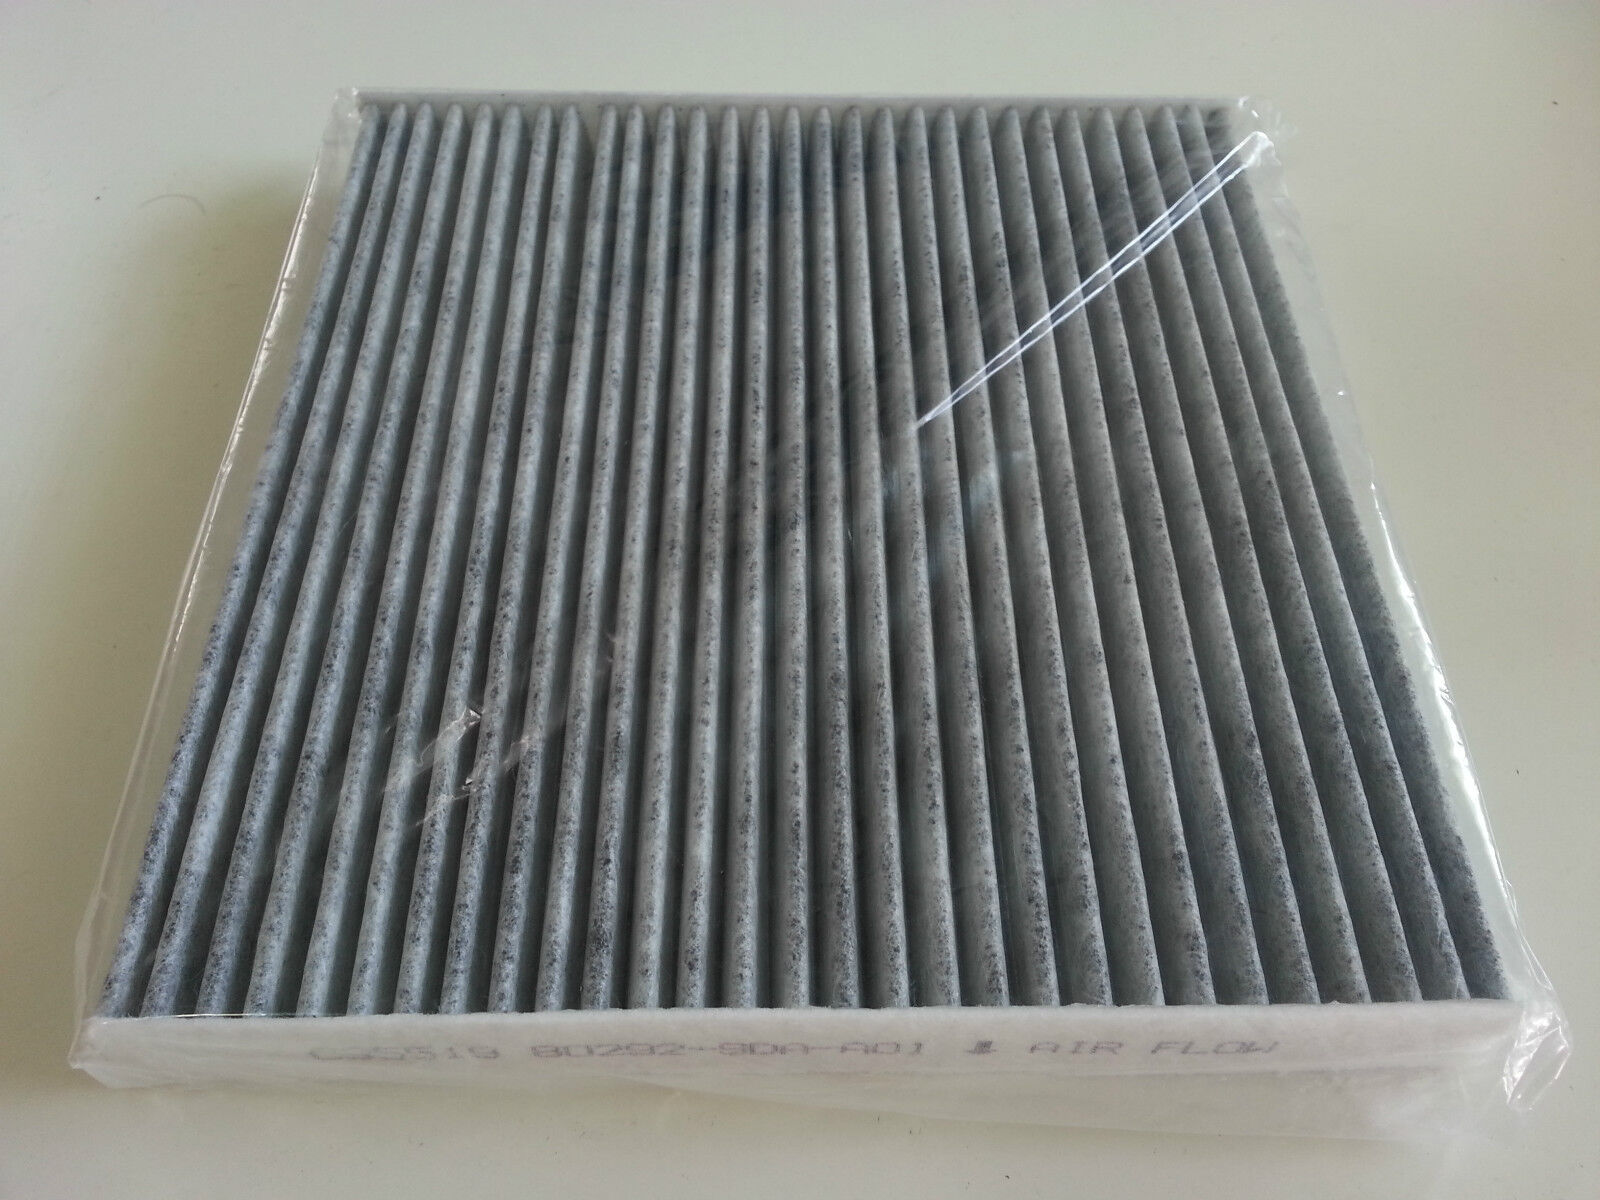 CARBONIZED CABIN AIR FILTER For ACURA ILX MDX RDX RL RLX TL TSX ZDX Great Fit